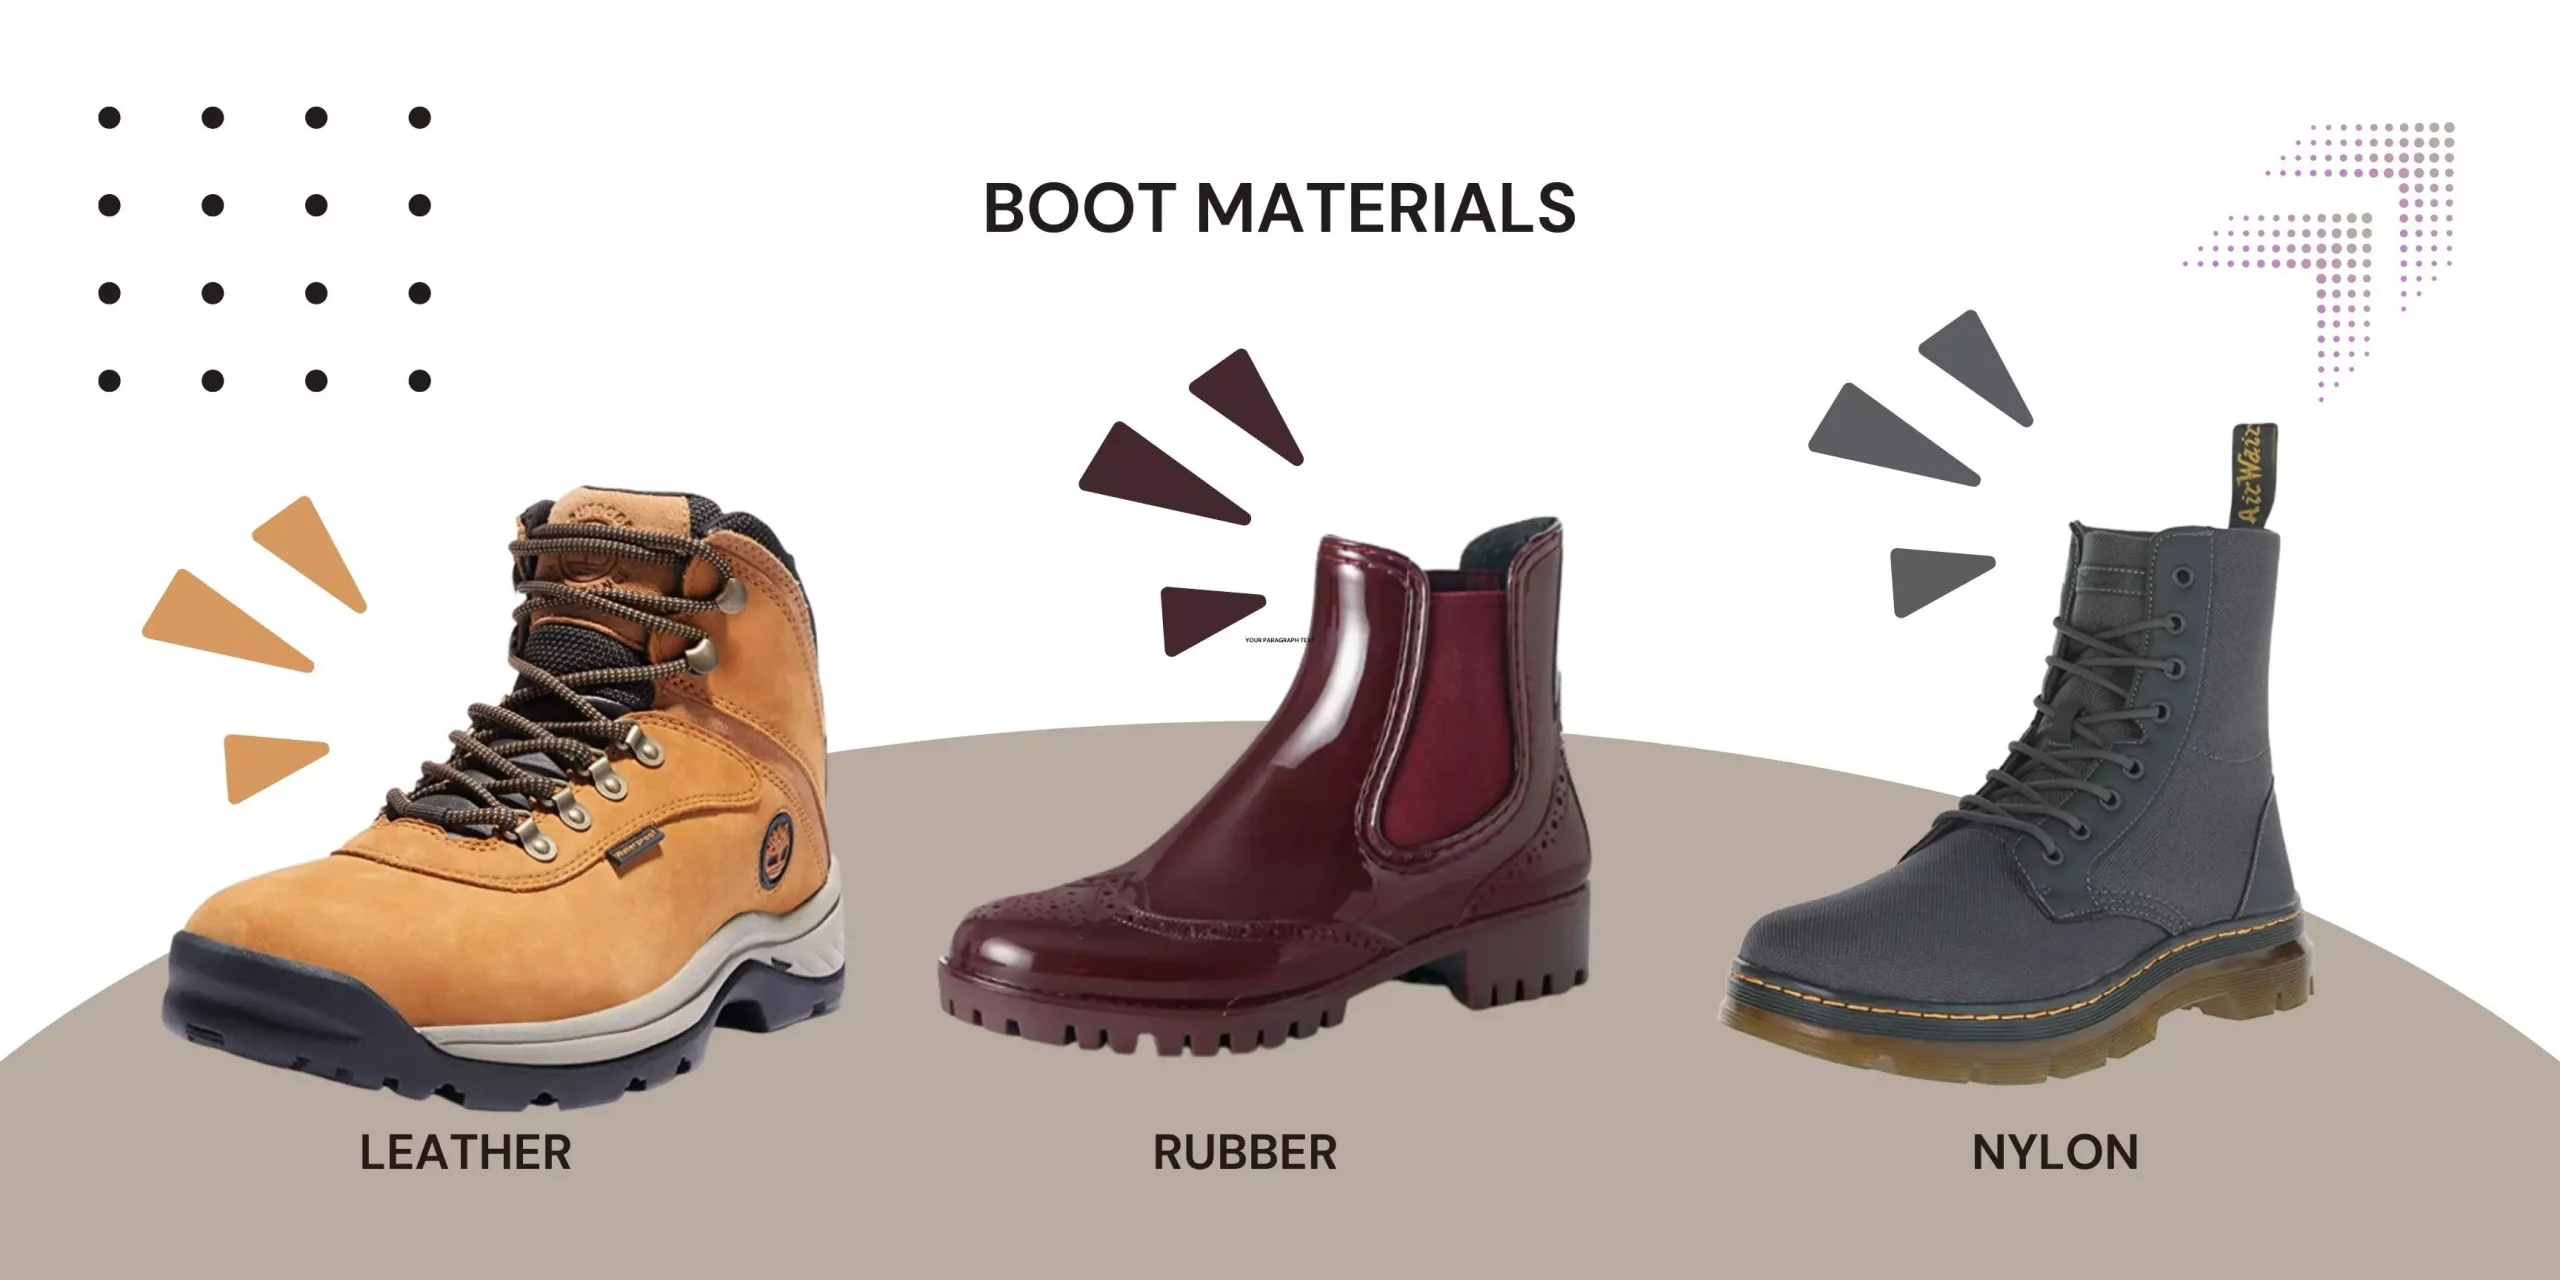 Different boot materials